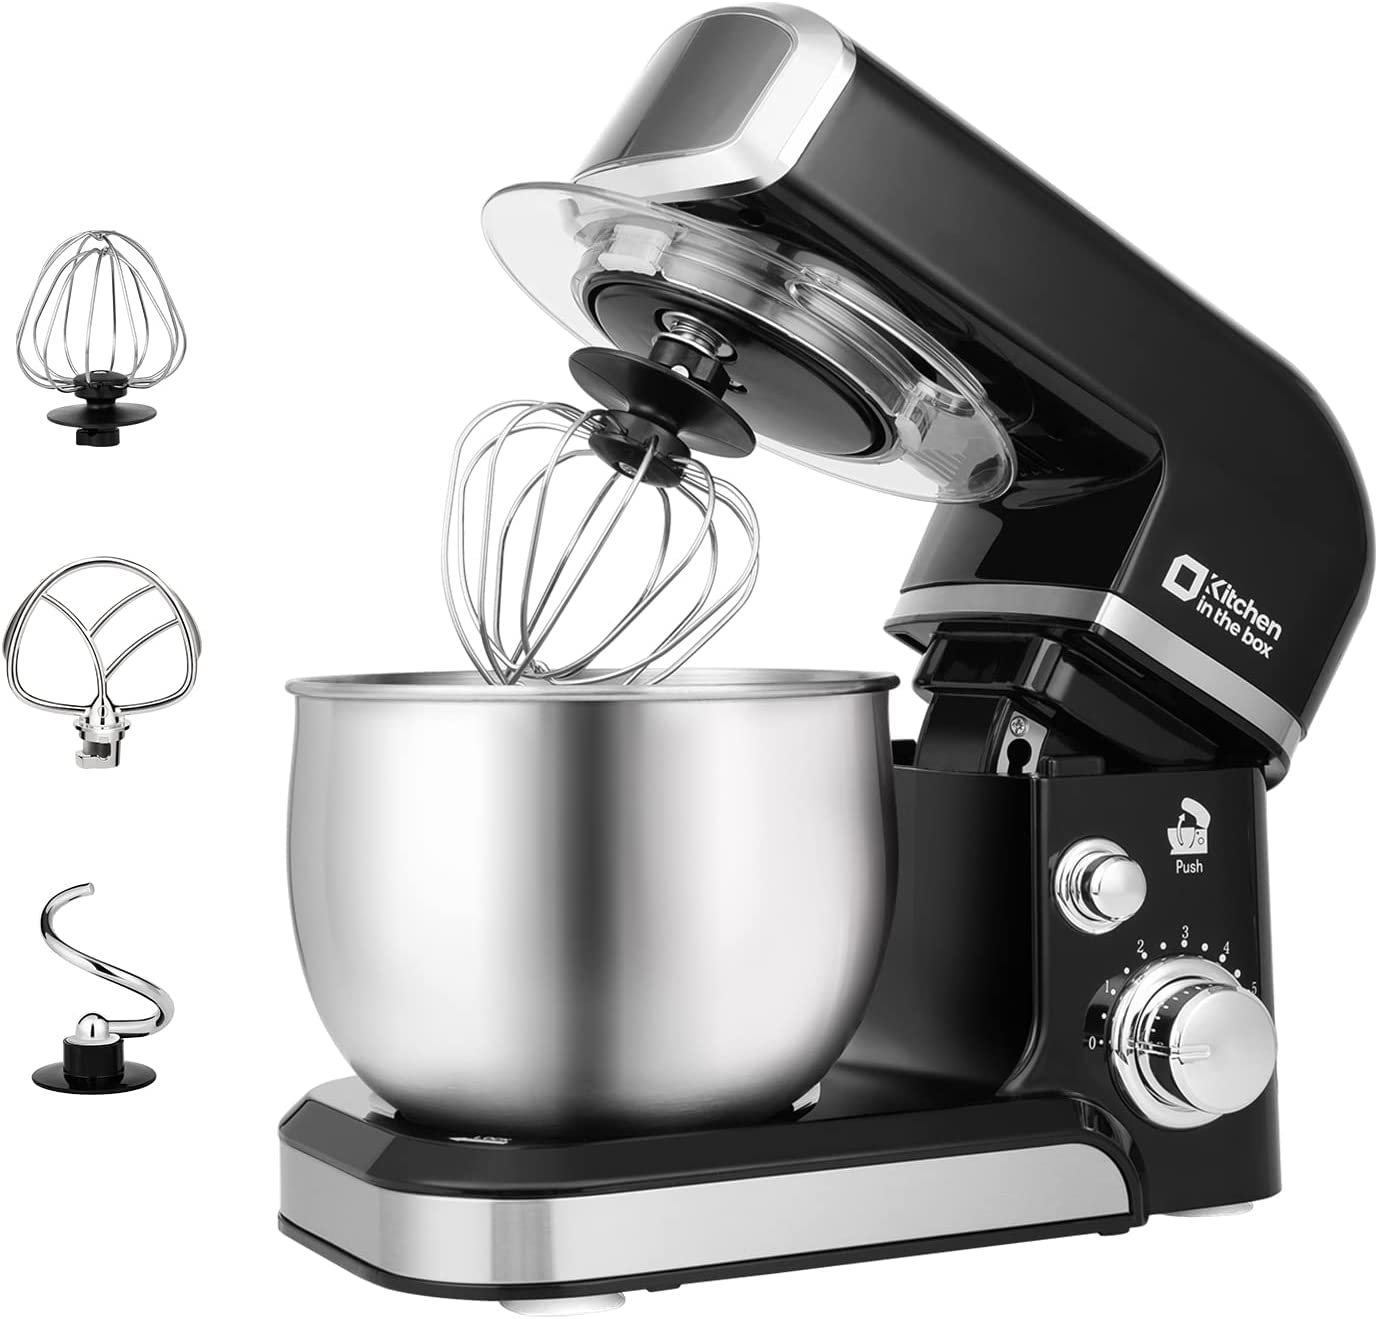 https://www.dontwasteyourmoney.com/wp-content/uploads/2023/05/kitchen-in-the-box-compact-removable-bowl-stand-mixer-stand-mixer.jpg